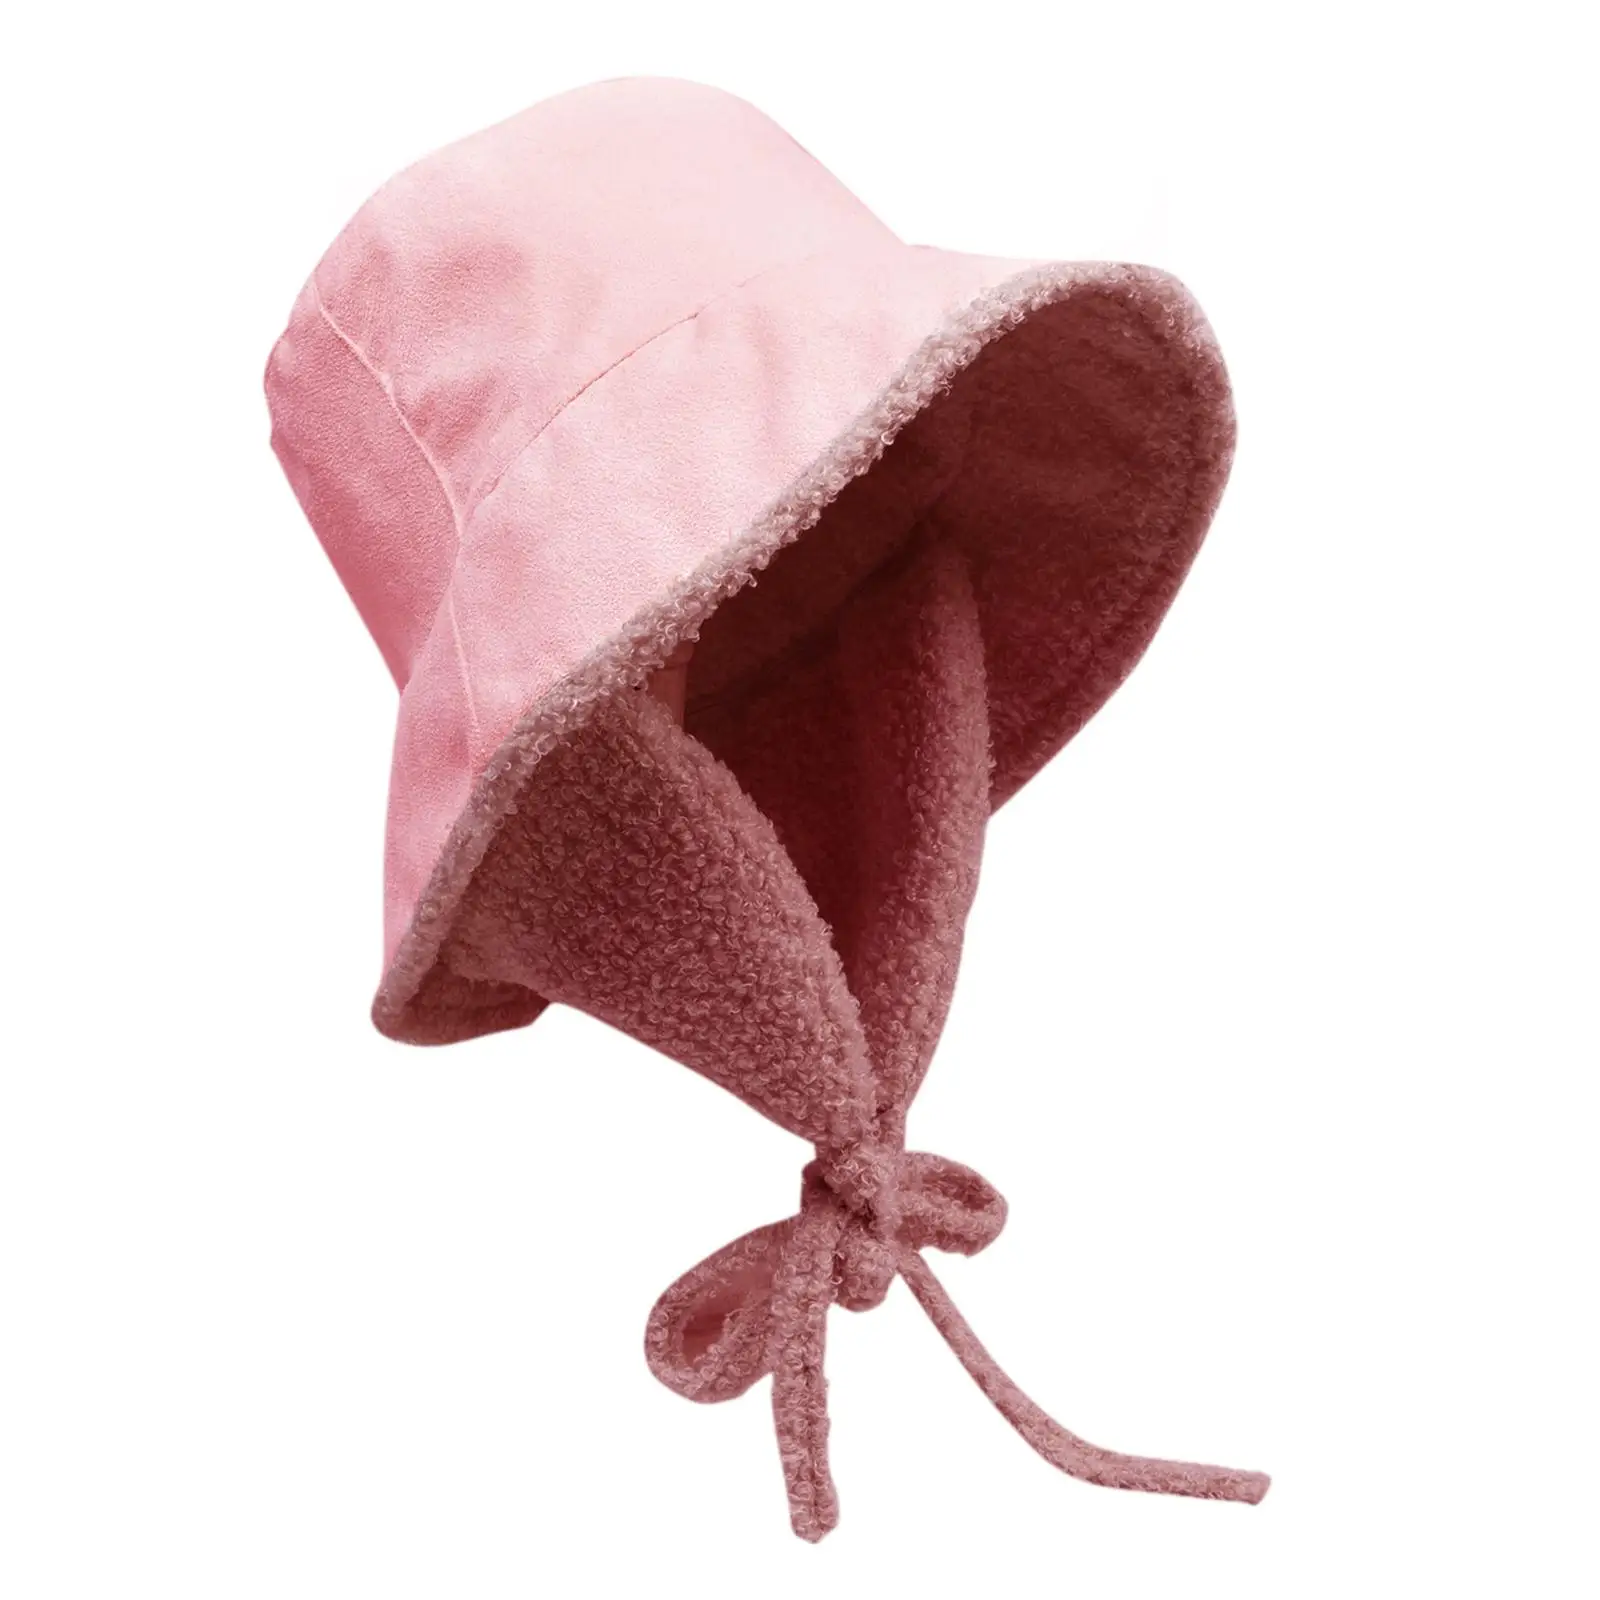 Warm Winter Hat Size Soft with Ear Protection Fisherman Hat Cute Bucket Hat for Women, Men, Adults, Picnic, Travel, Outdoor